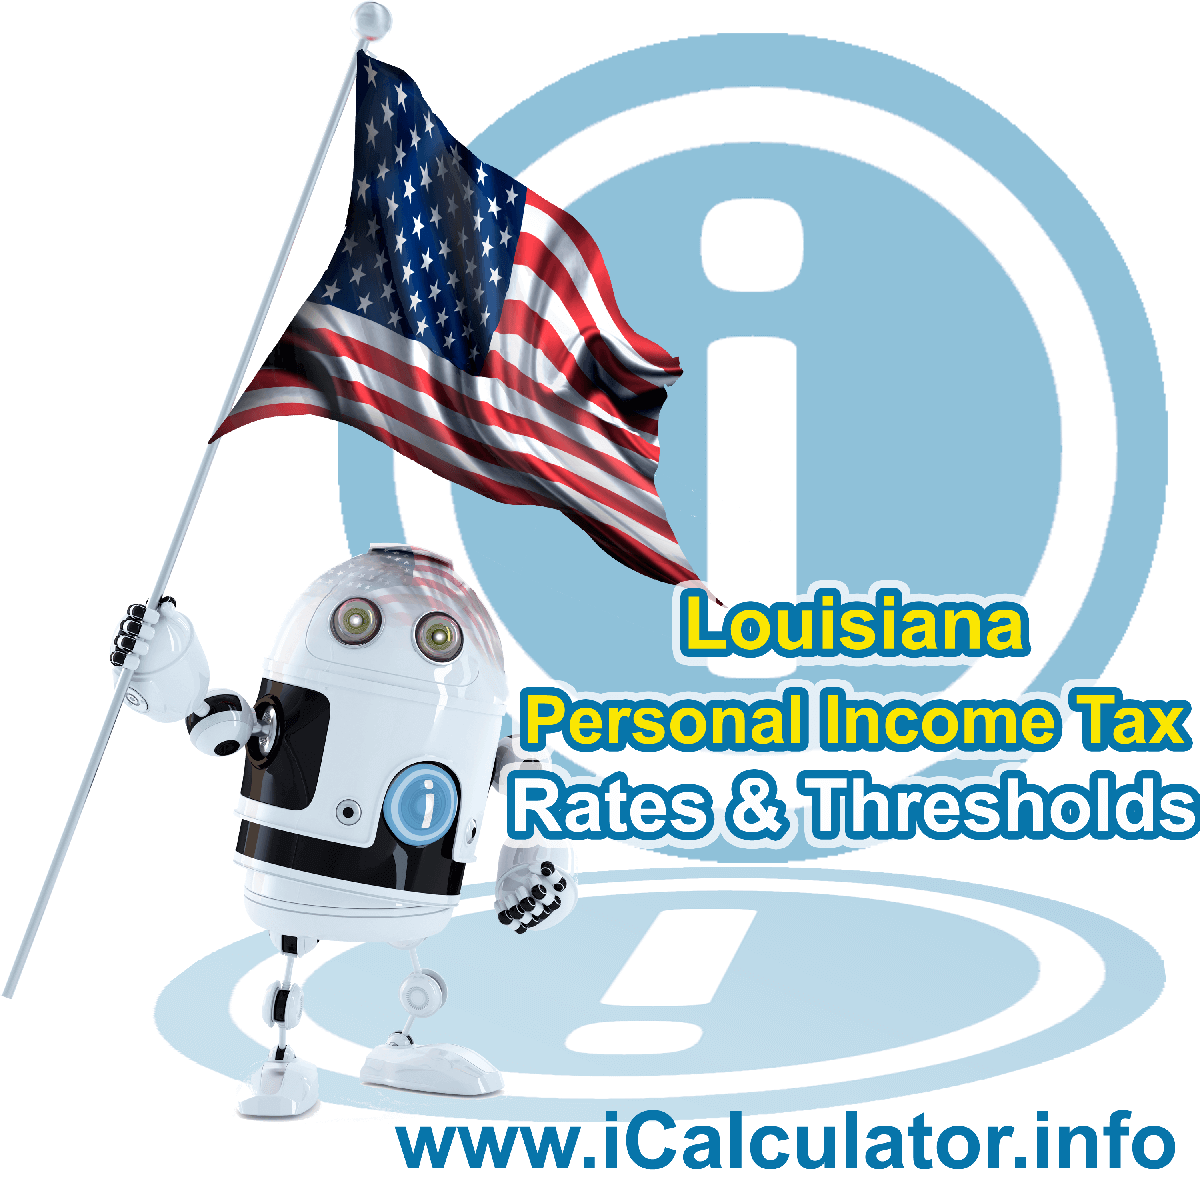 Louisiana State Tax Tables 2023. This image displays details of the Louisiana State Tax Tables for the 2023 tax return year which is provided in support of the 2023 US Tax Calculator